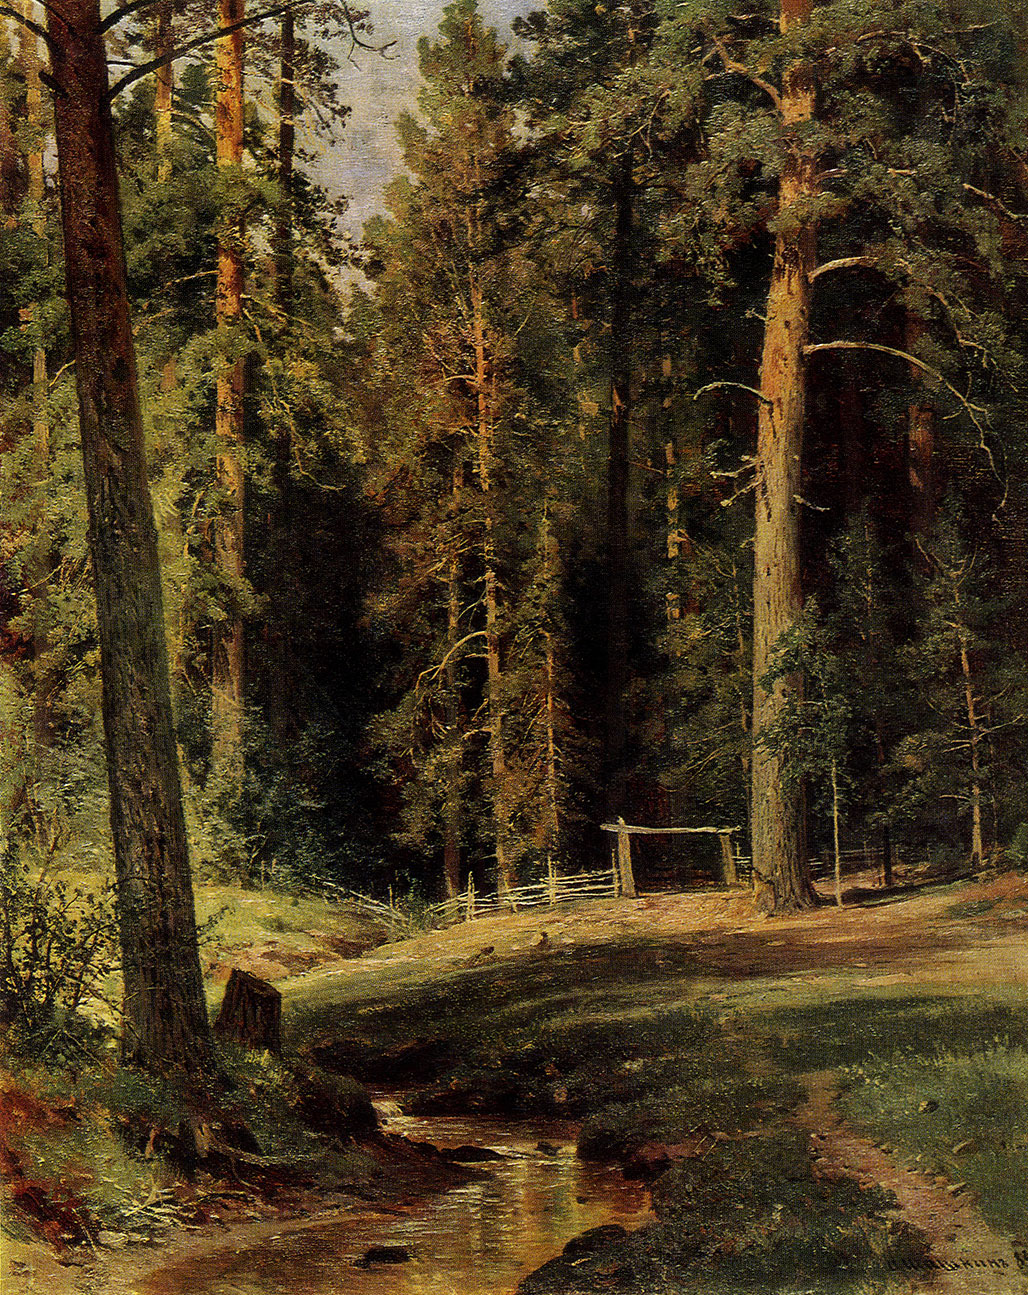 81. Forest edge. 1884. Oil on canvas. 71.5X57.5 cm. Picture Gallery of Armenia, Yerevan